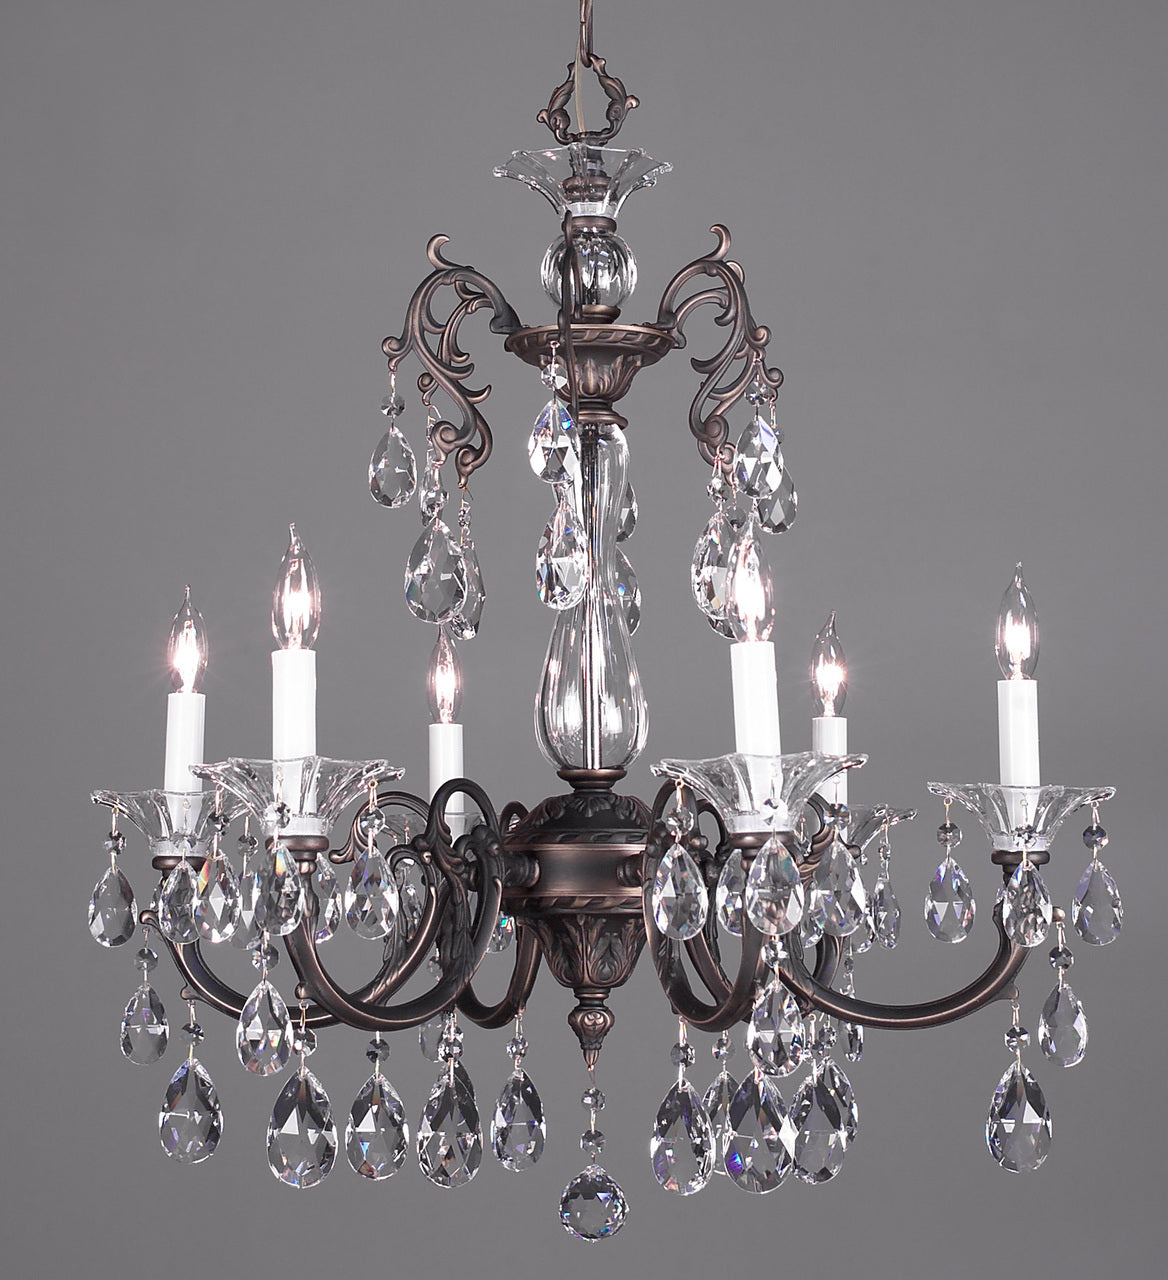 Classic Lighting 57056 SS CGT Via Lombardi Crystal Chandelier in Silverstone (Imported from Spain)